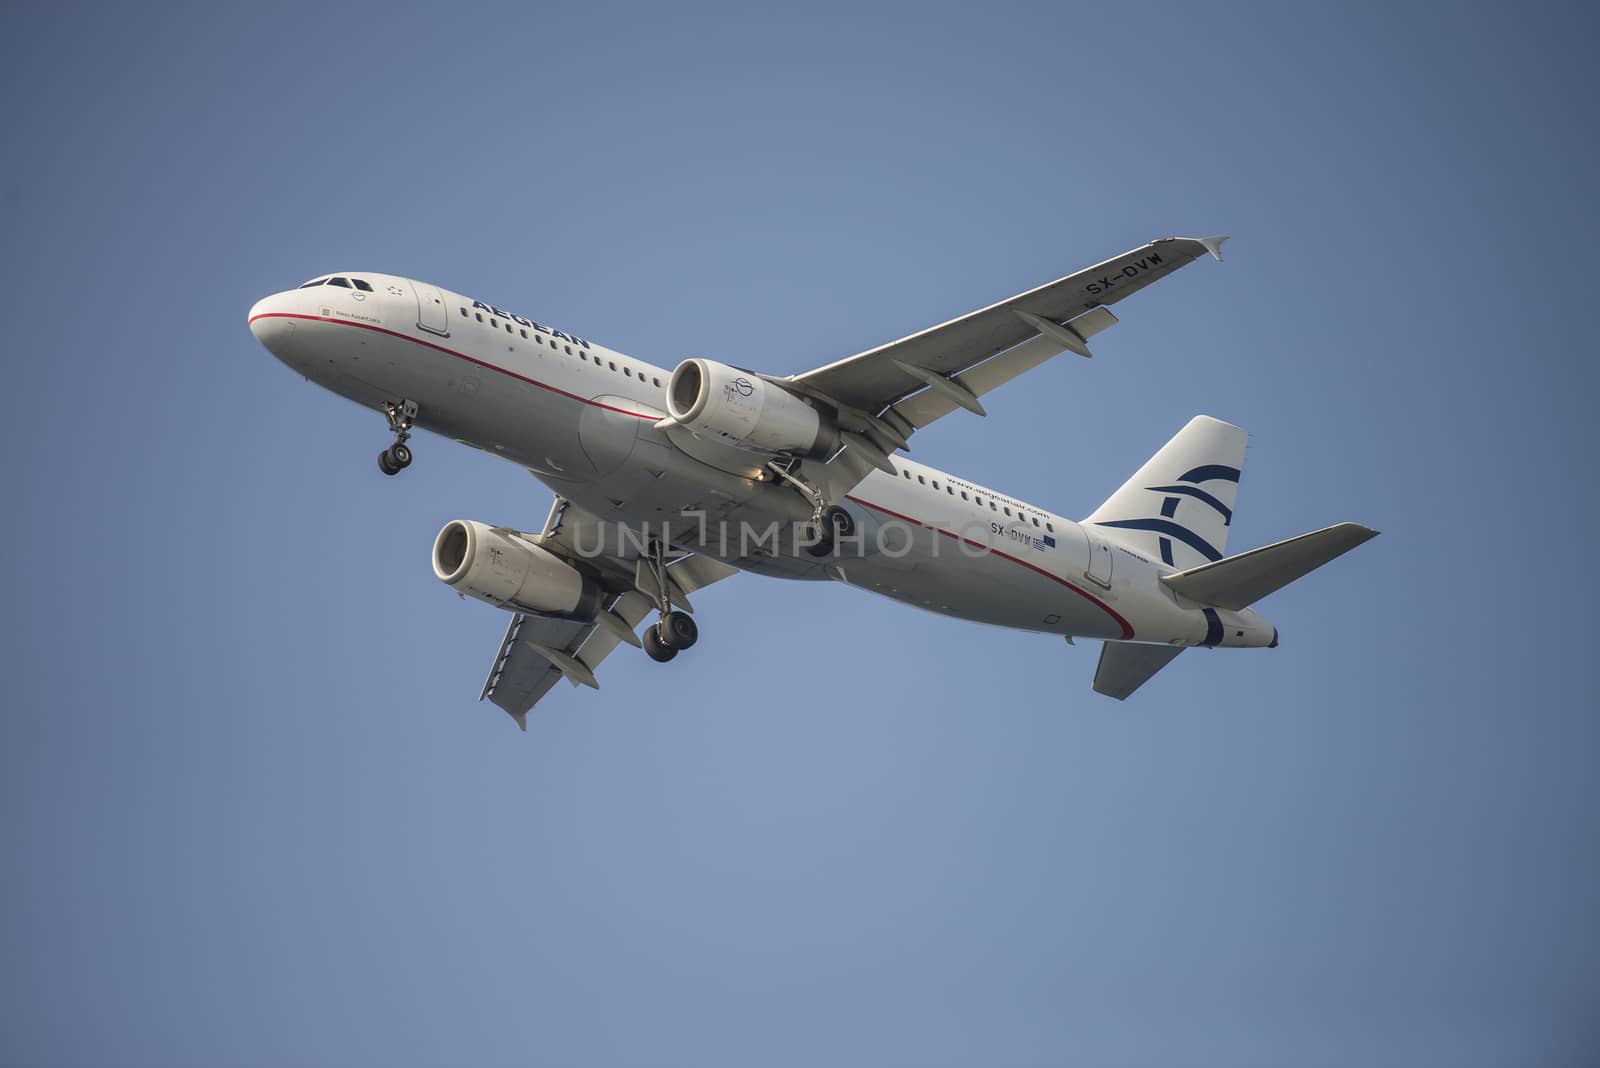 Aegean Airlines, Greece, Airbus a320. The pictures of the planes are shot very close an airport just before landing. September 2013.